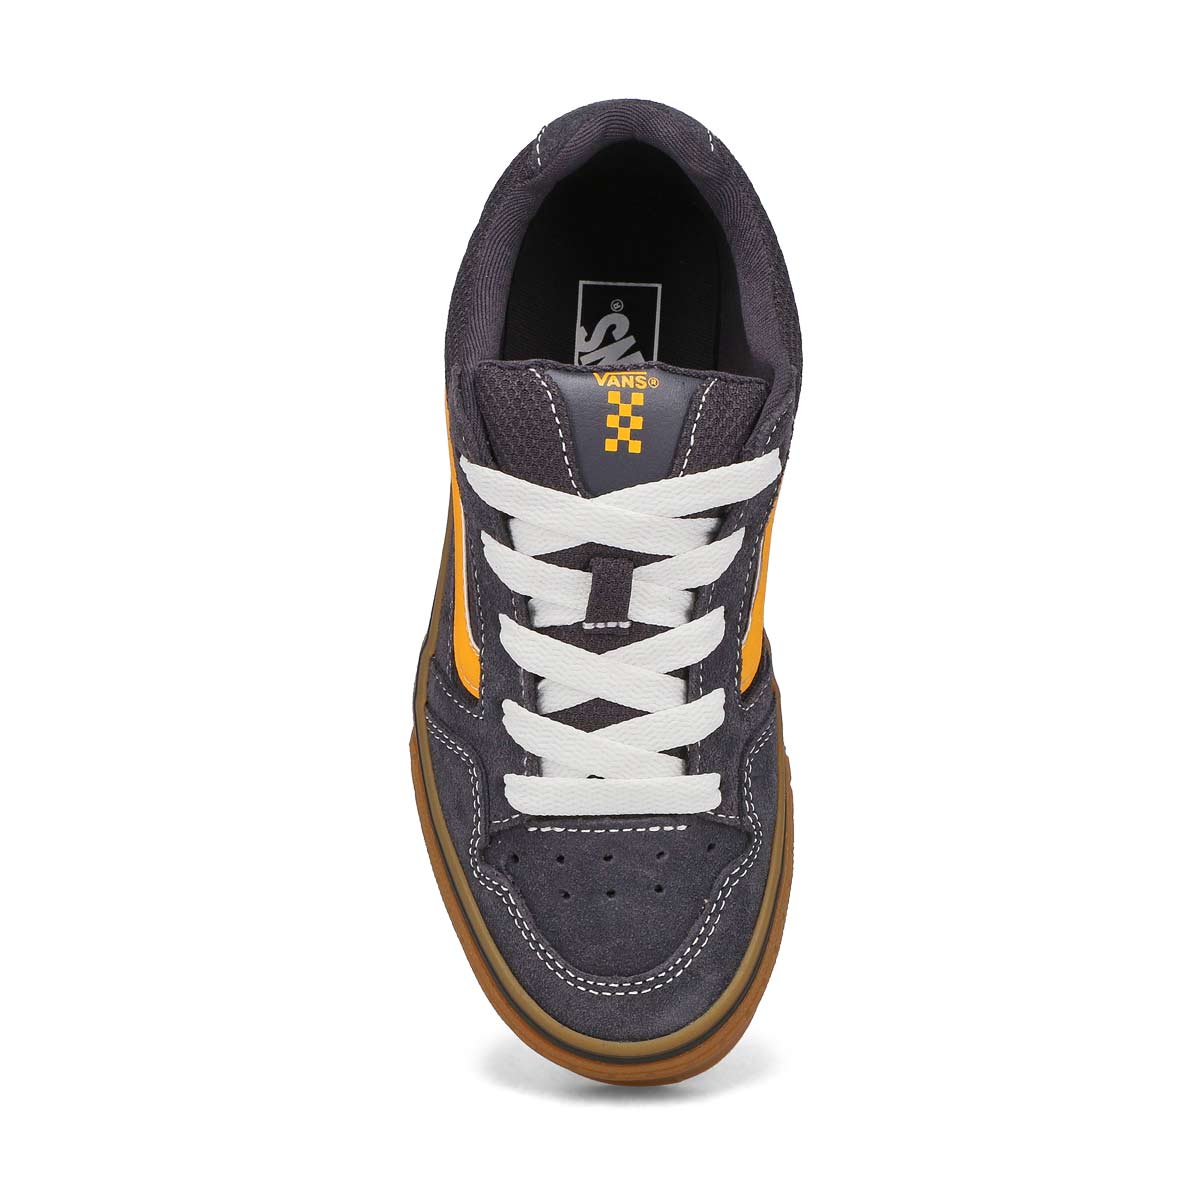 Boys' Caldrone Lace Up Sneaker - Charcoal/Yellow